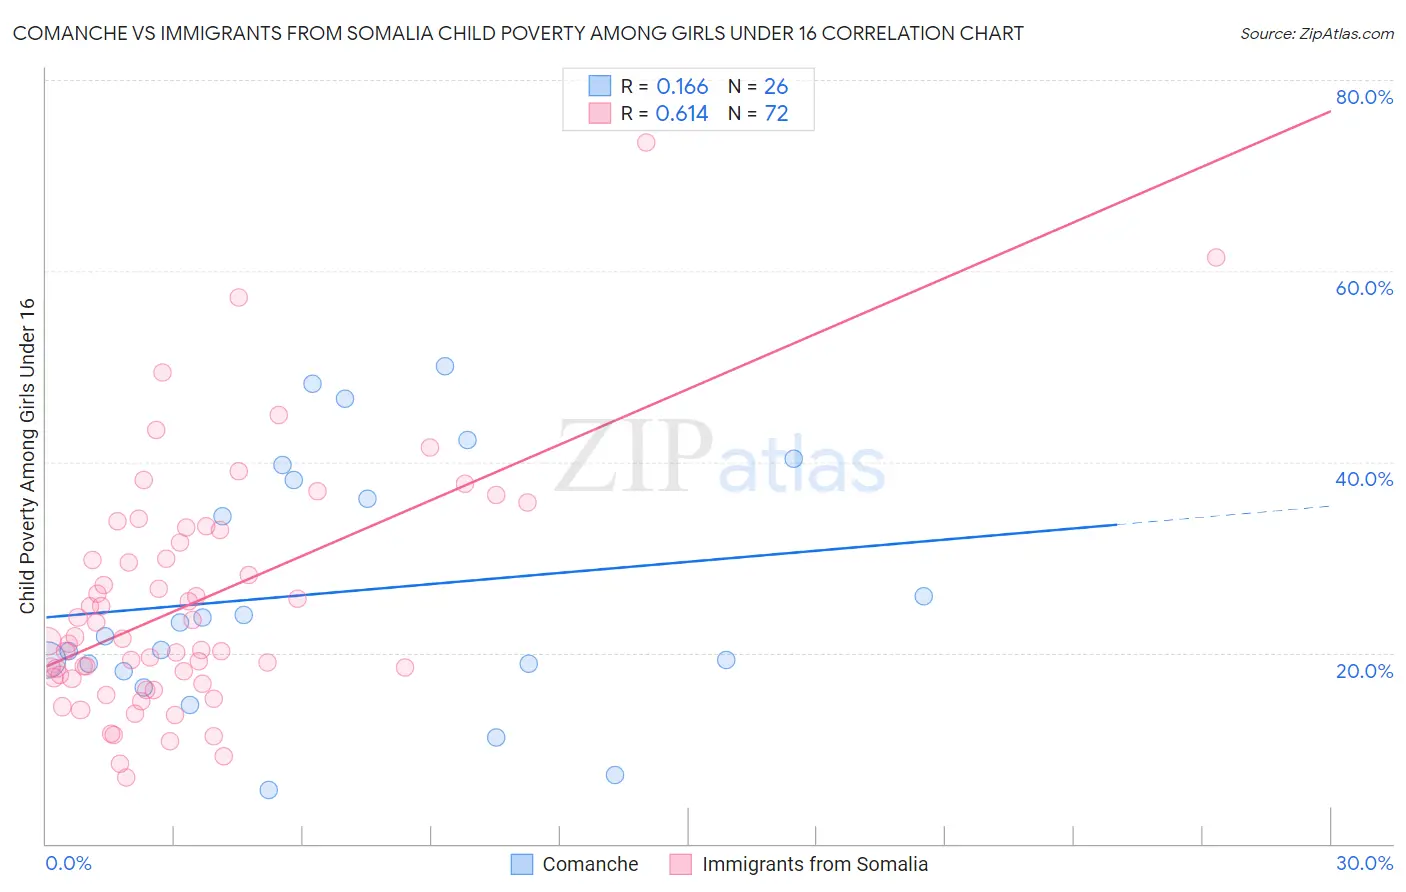 Comanche vs Immigrants from Somalia Child Poverty Among Girls Under 16